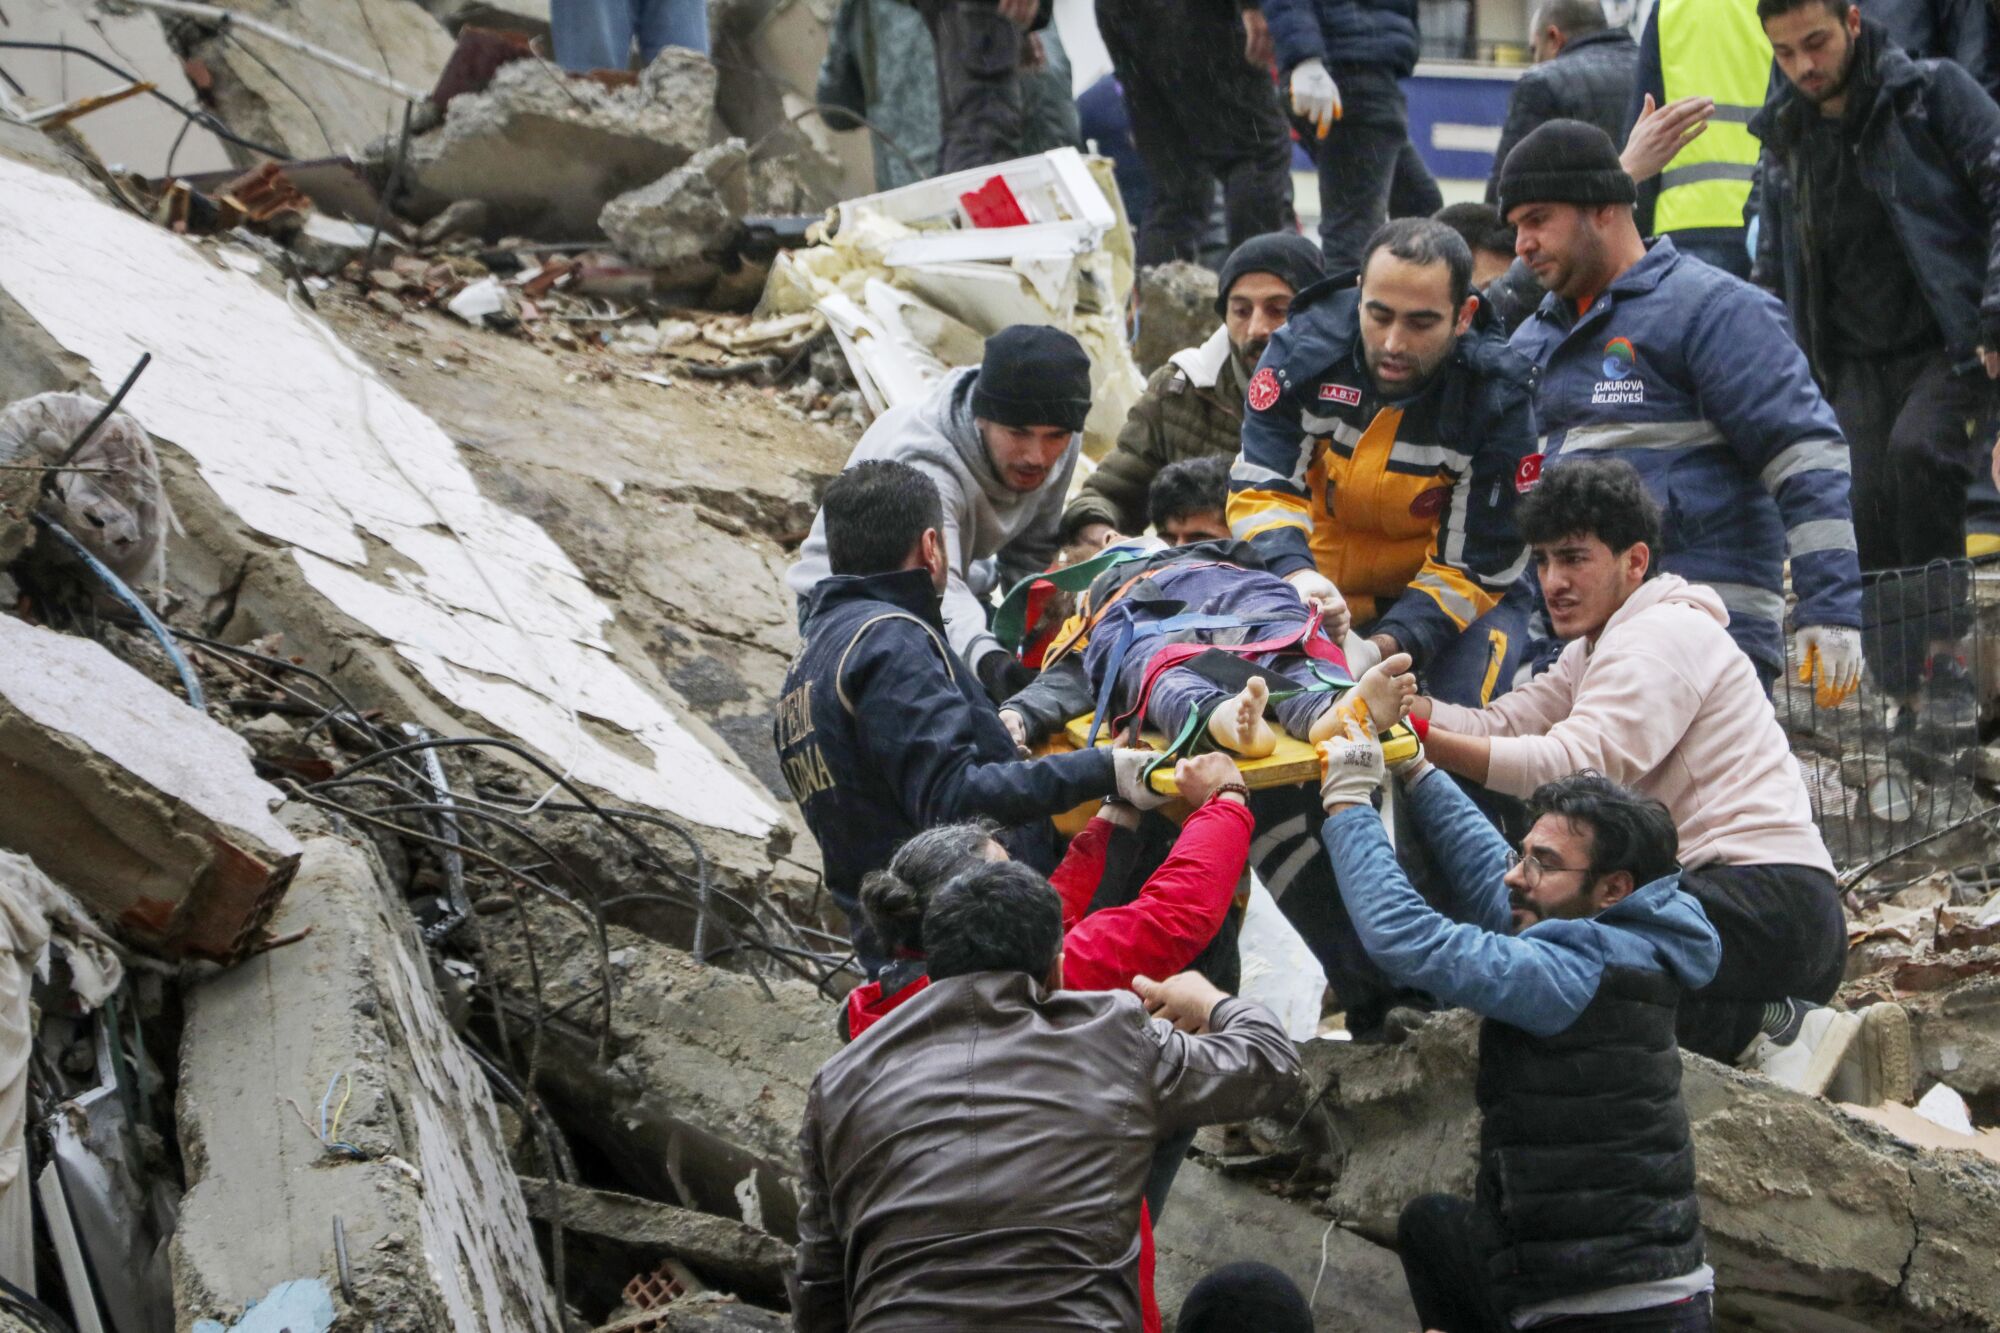 People and emergency teams rescue a person on a stretcher from a collapsed building.